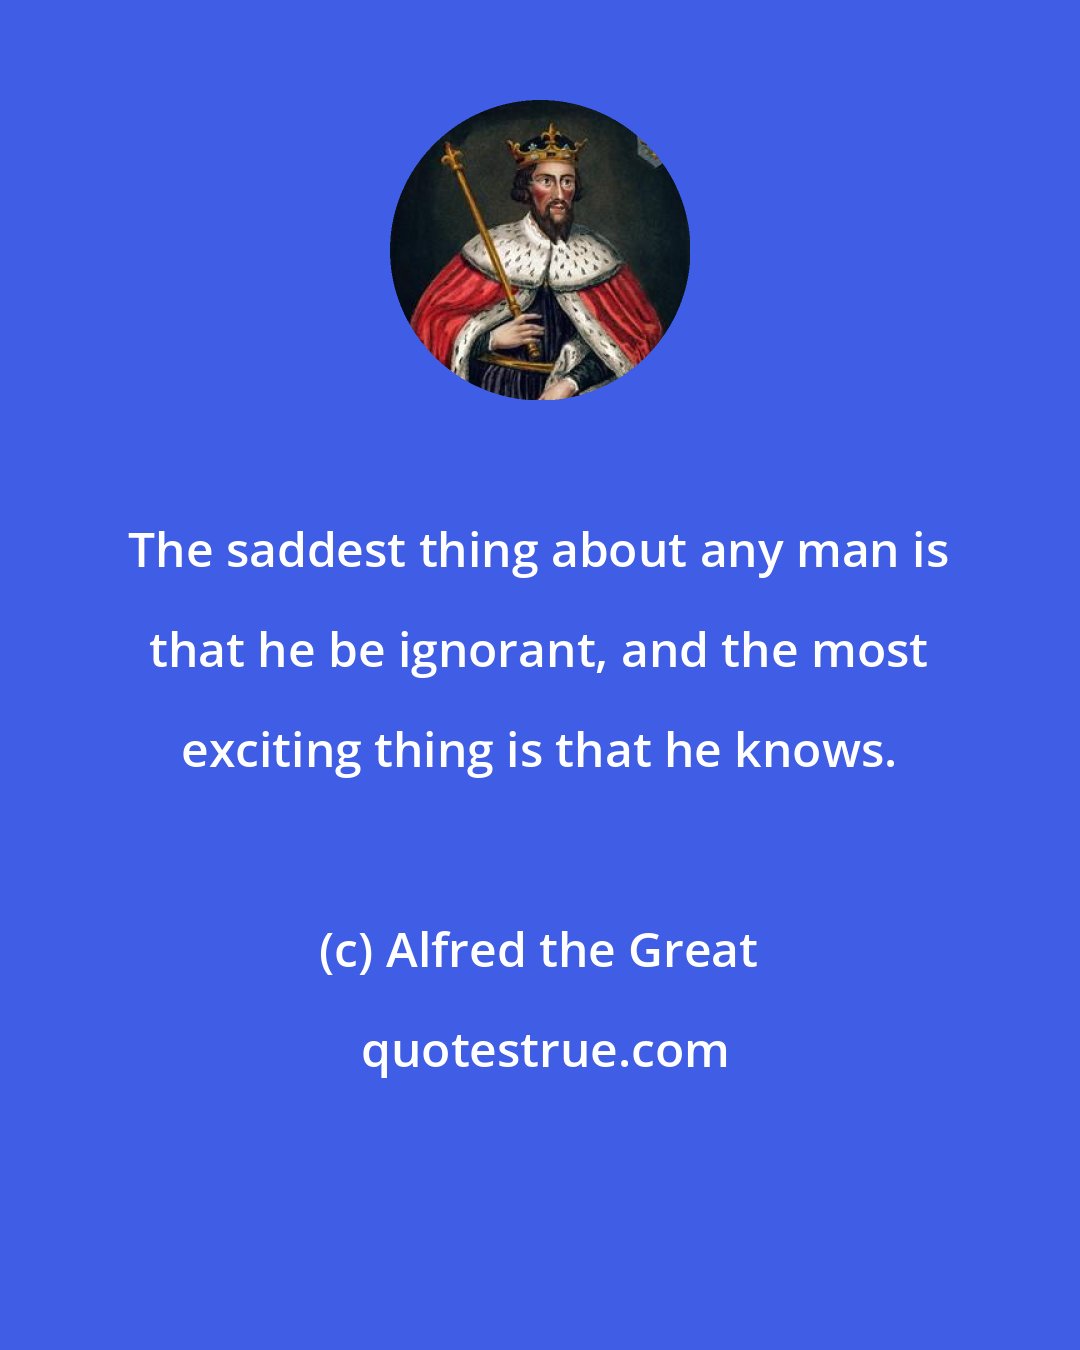 Alfred the Great: The saddest thing about any man is that he be ignorant, and the most exciting thing is that he knows.